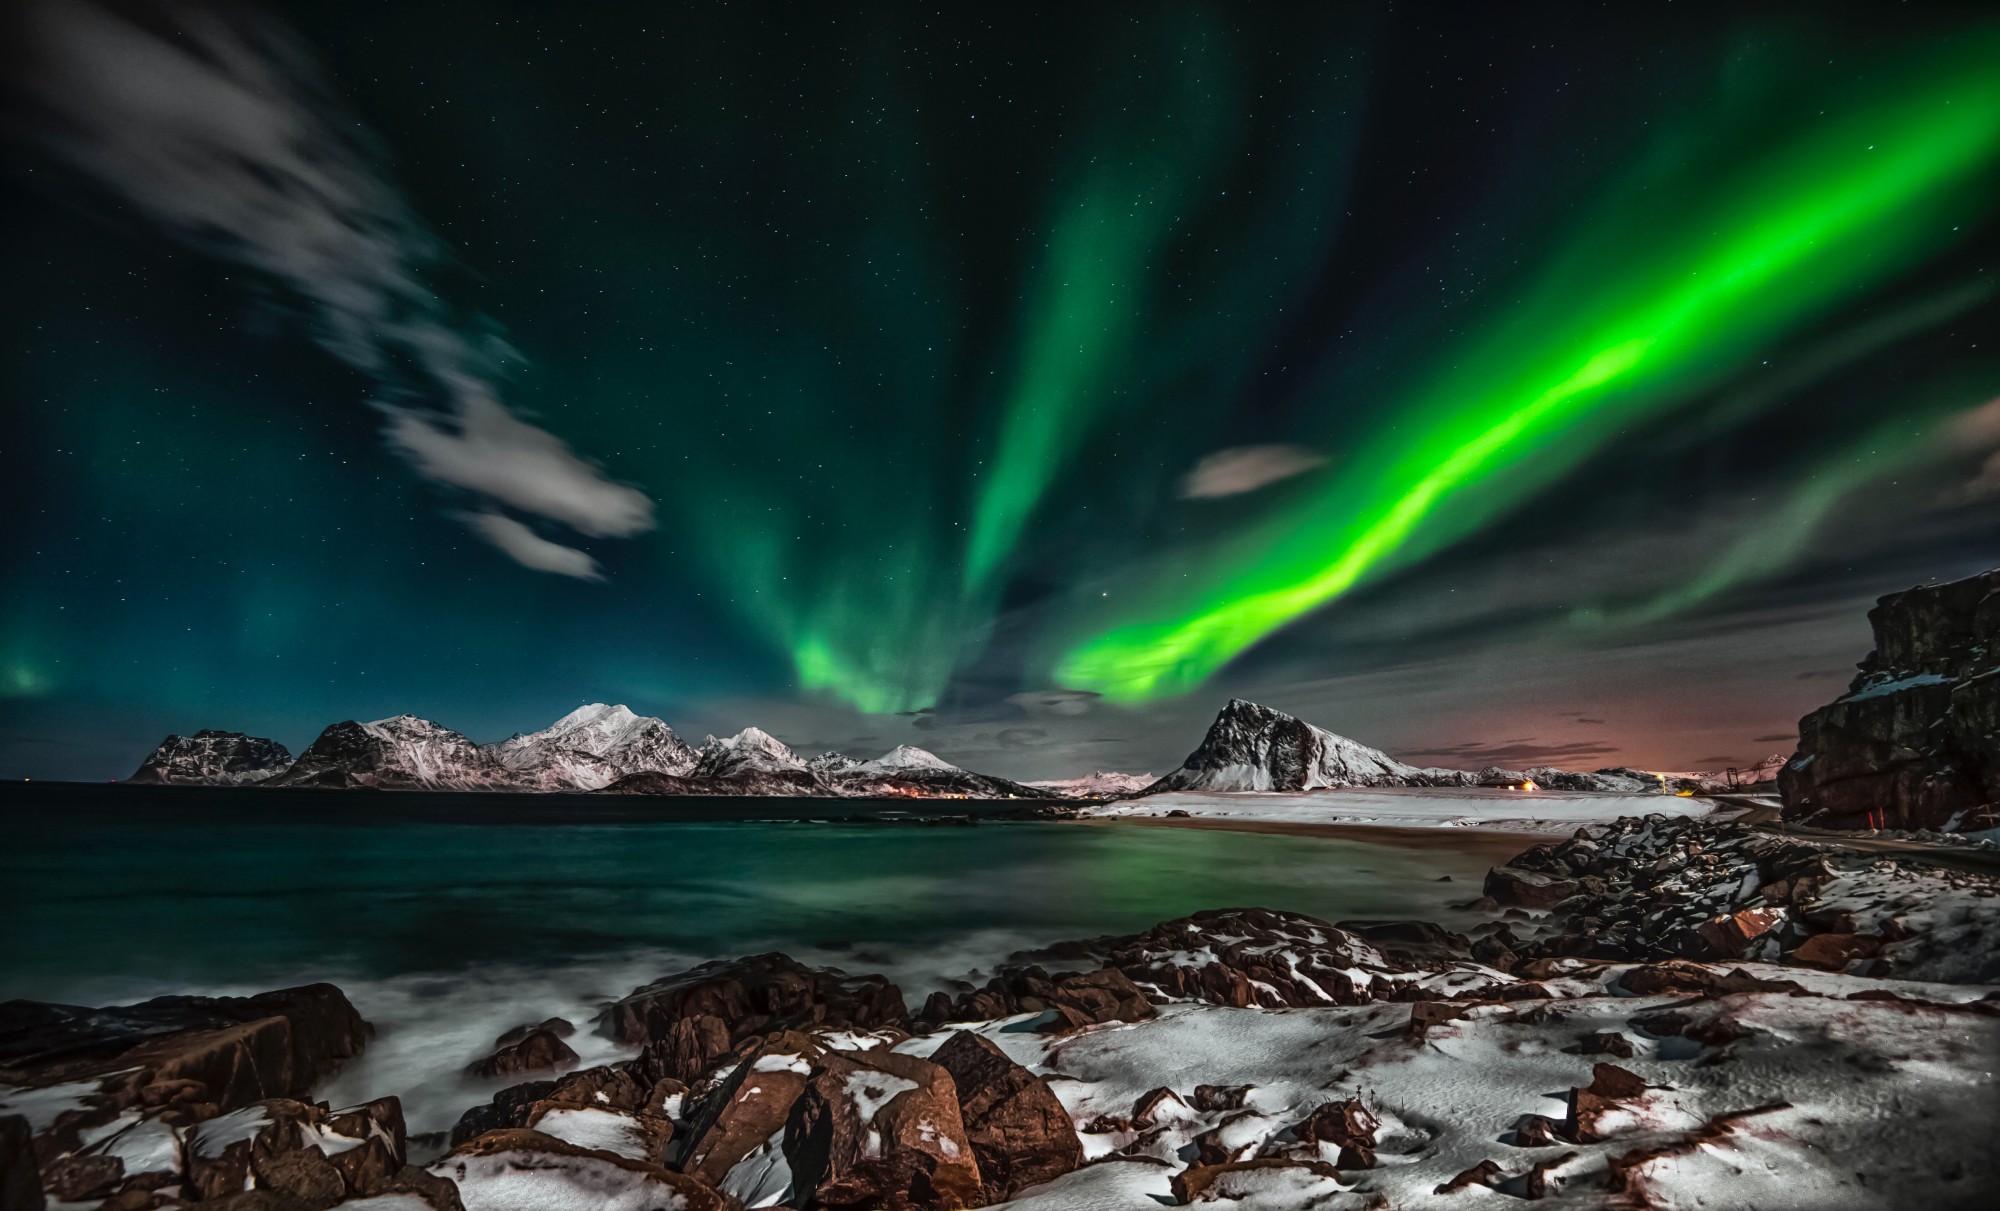 Northern Lights Holidays: A COVID-Safe Option – How moonstride Can Help